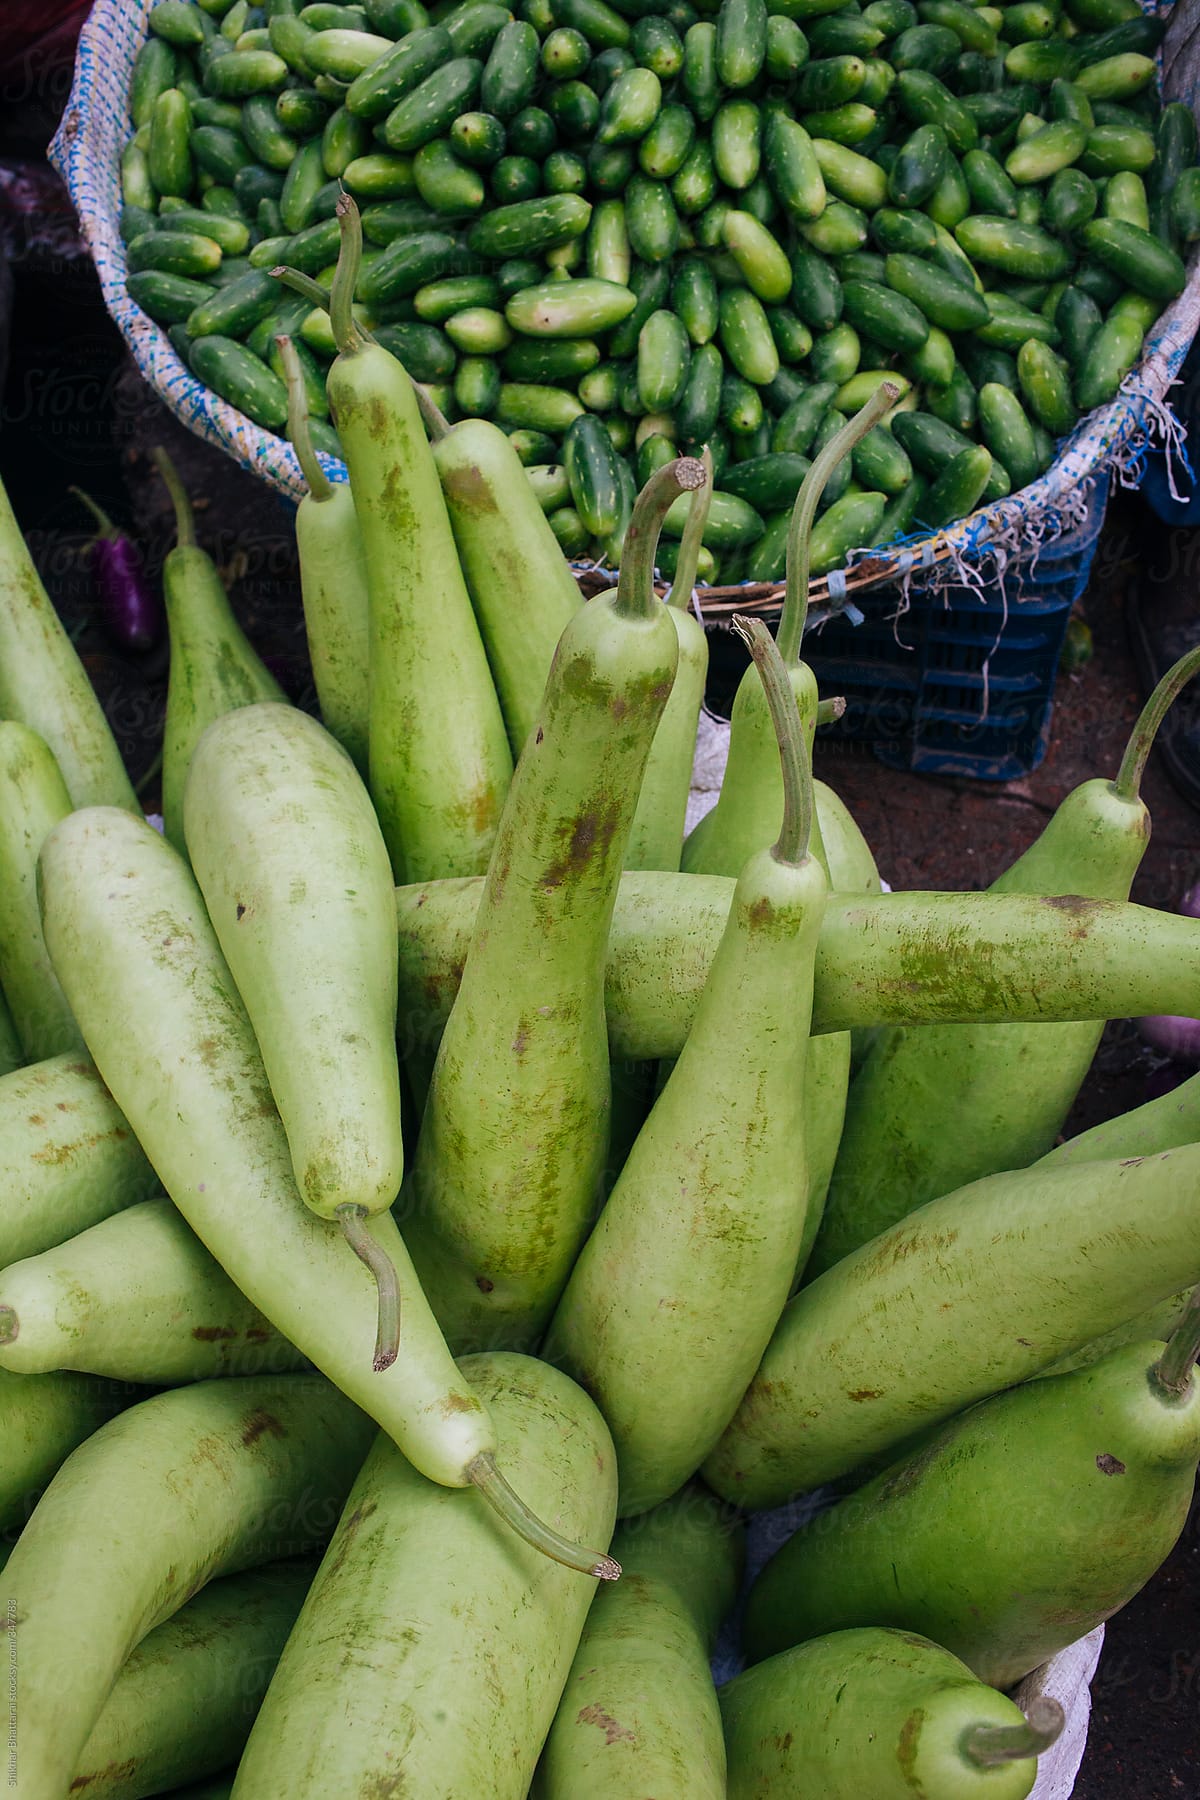 Bottle Gourd on sale at a food market in Asia.